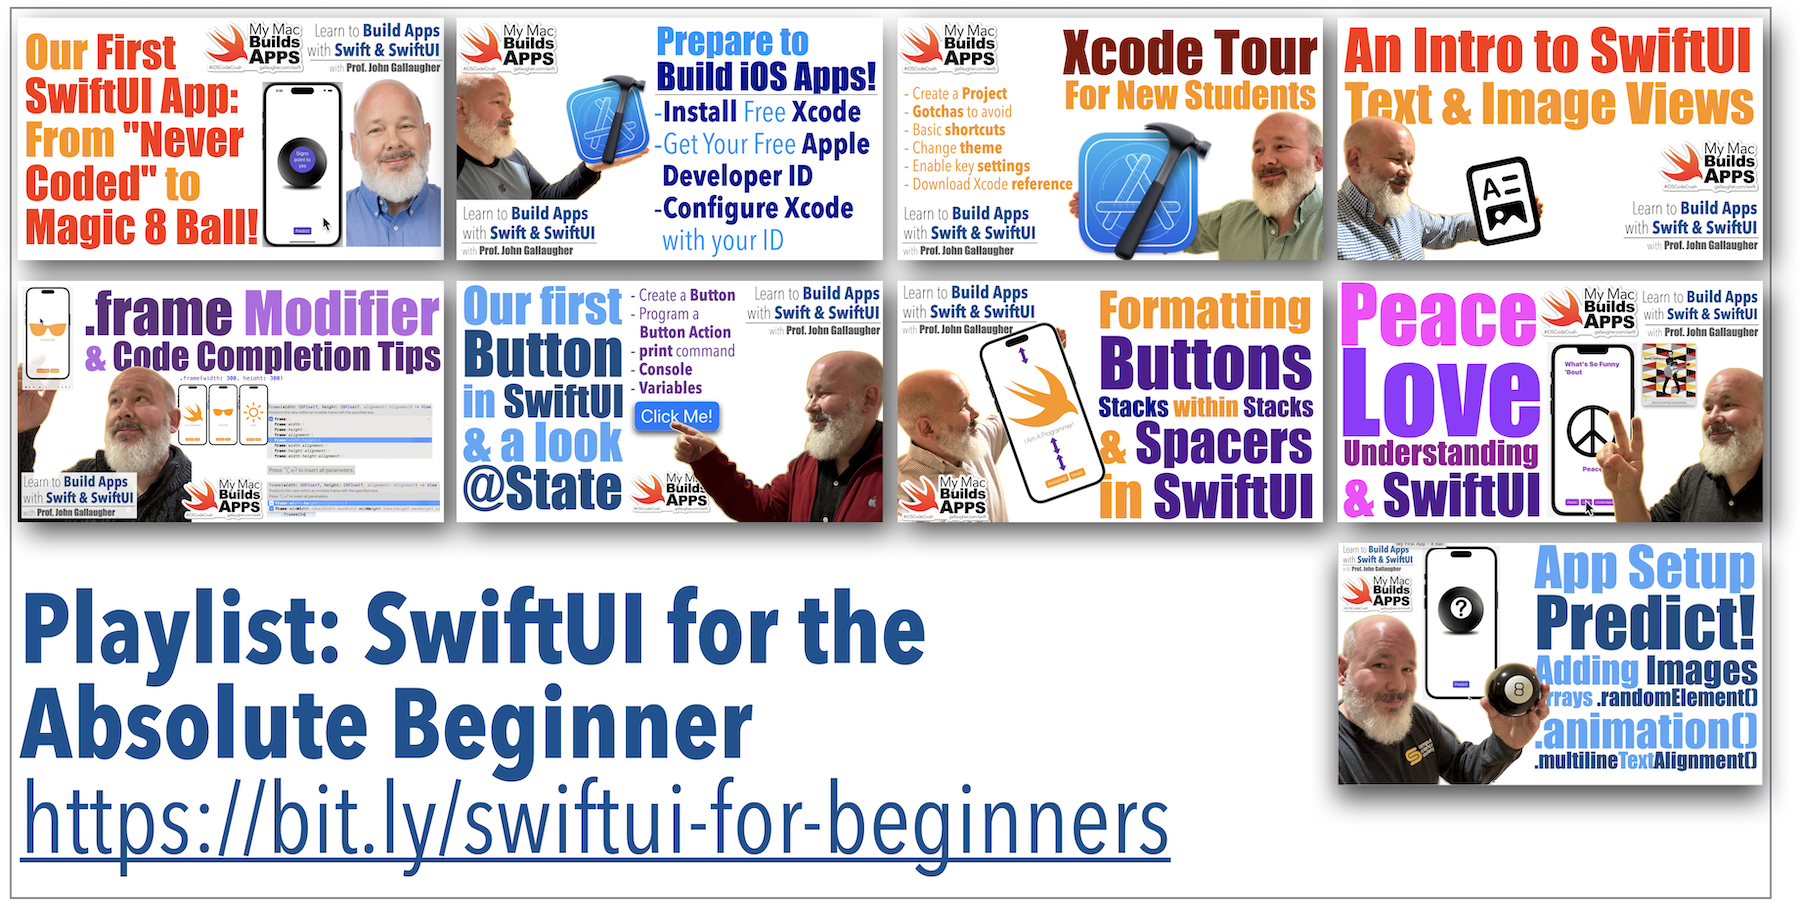 9 web thumbnails and link to bit.ly/swiftui-for-beginners